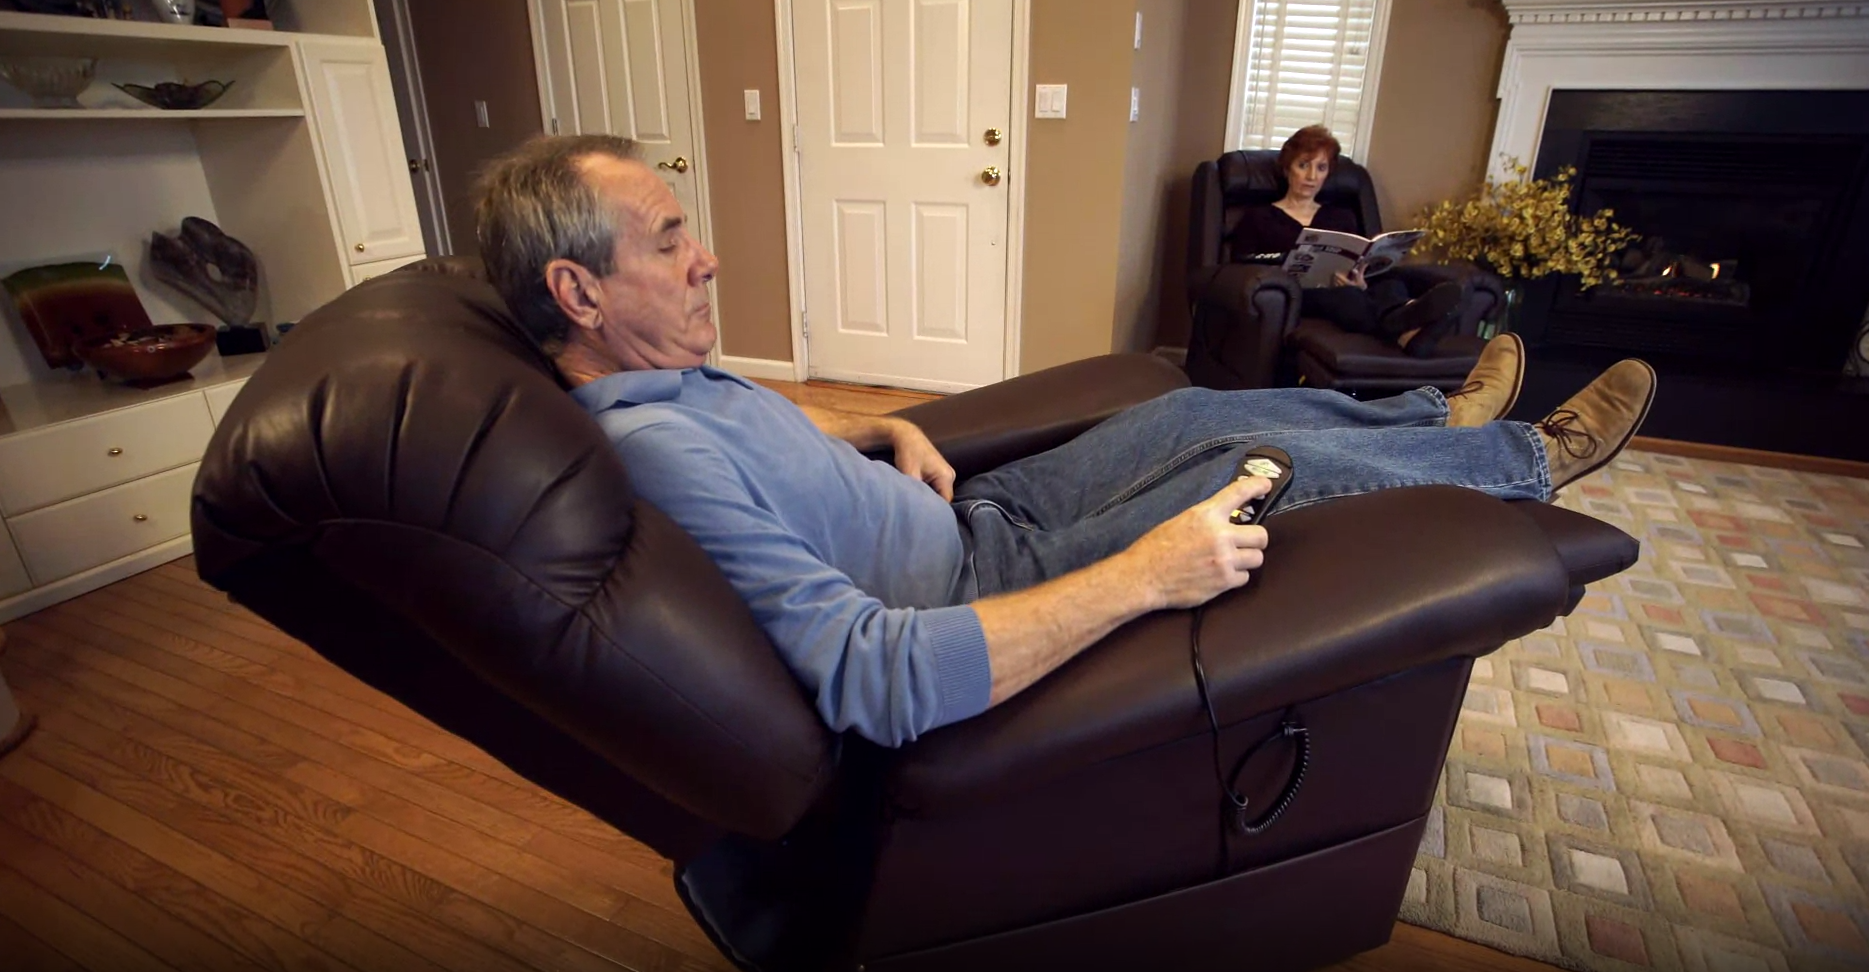 A man sits in his lift chair with the controller in his hand while his wife sits across from him in a chair